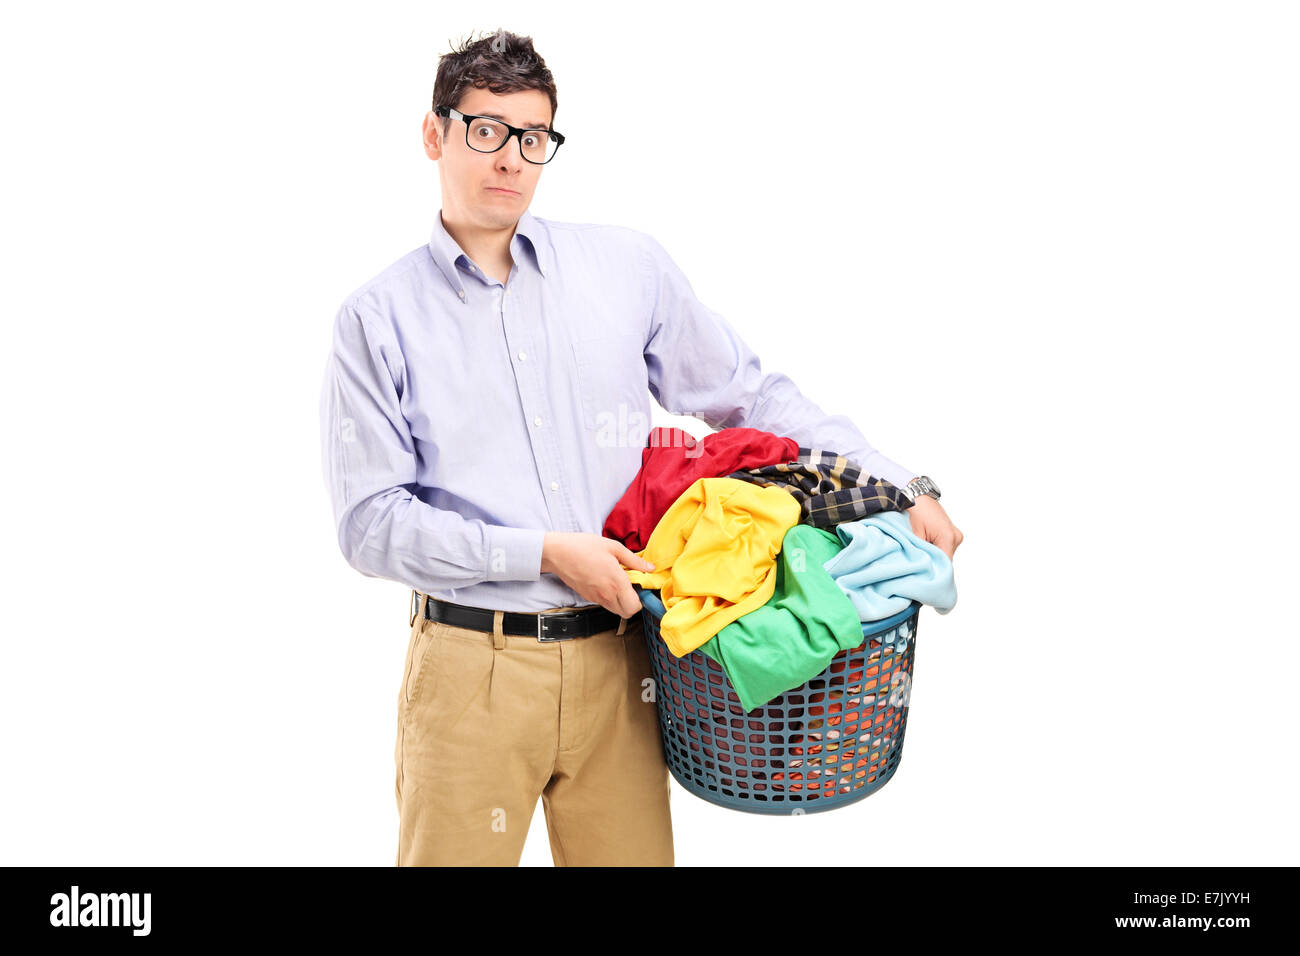 Terrified young man holding a laundry basket full of clothes isolated on white background Stock Photo